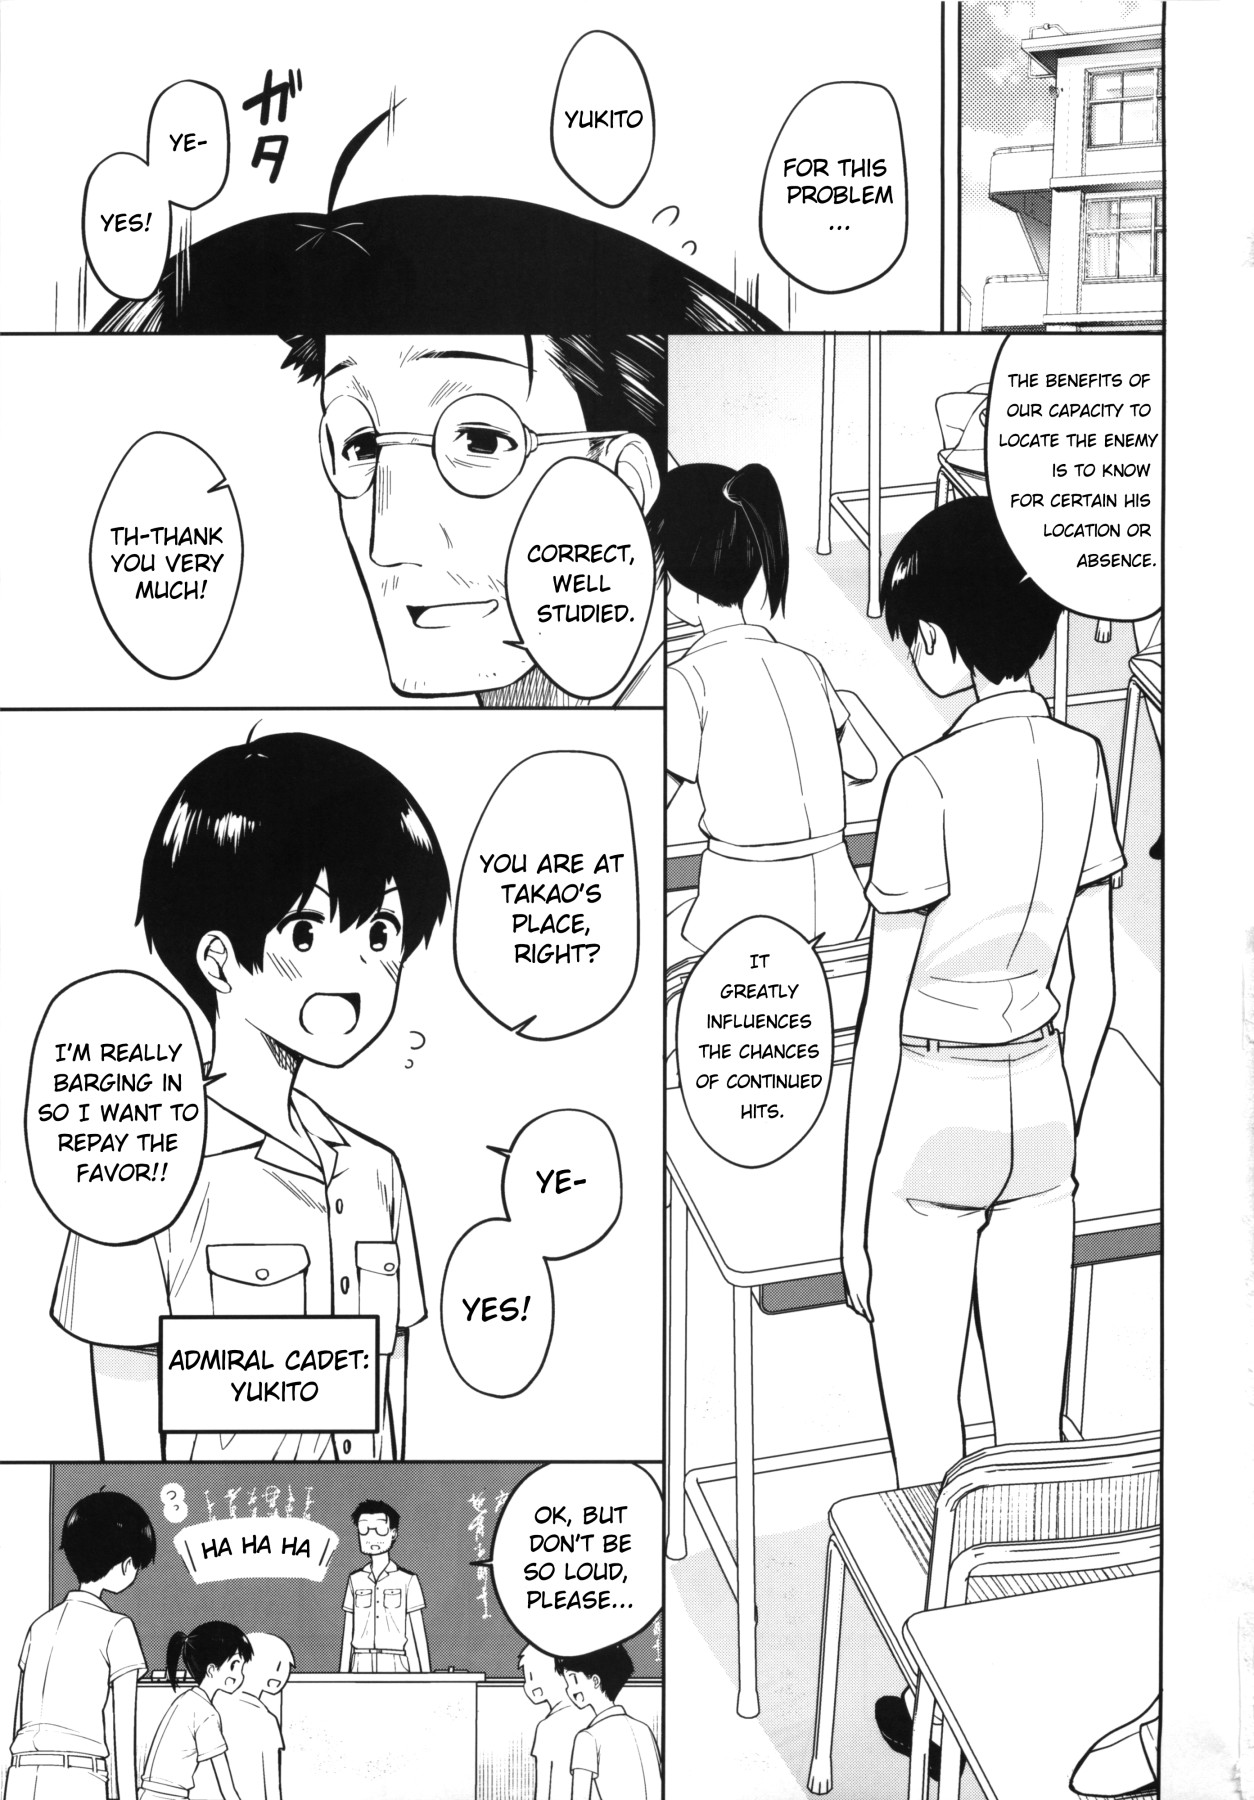 Hentai Manga Comic-My Little Brother Is Really Cute And He's Going To Be An Admiral But Is It okay For Me To Be in Love With him?-Read-2